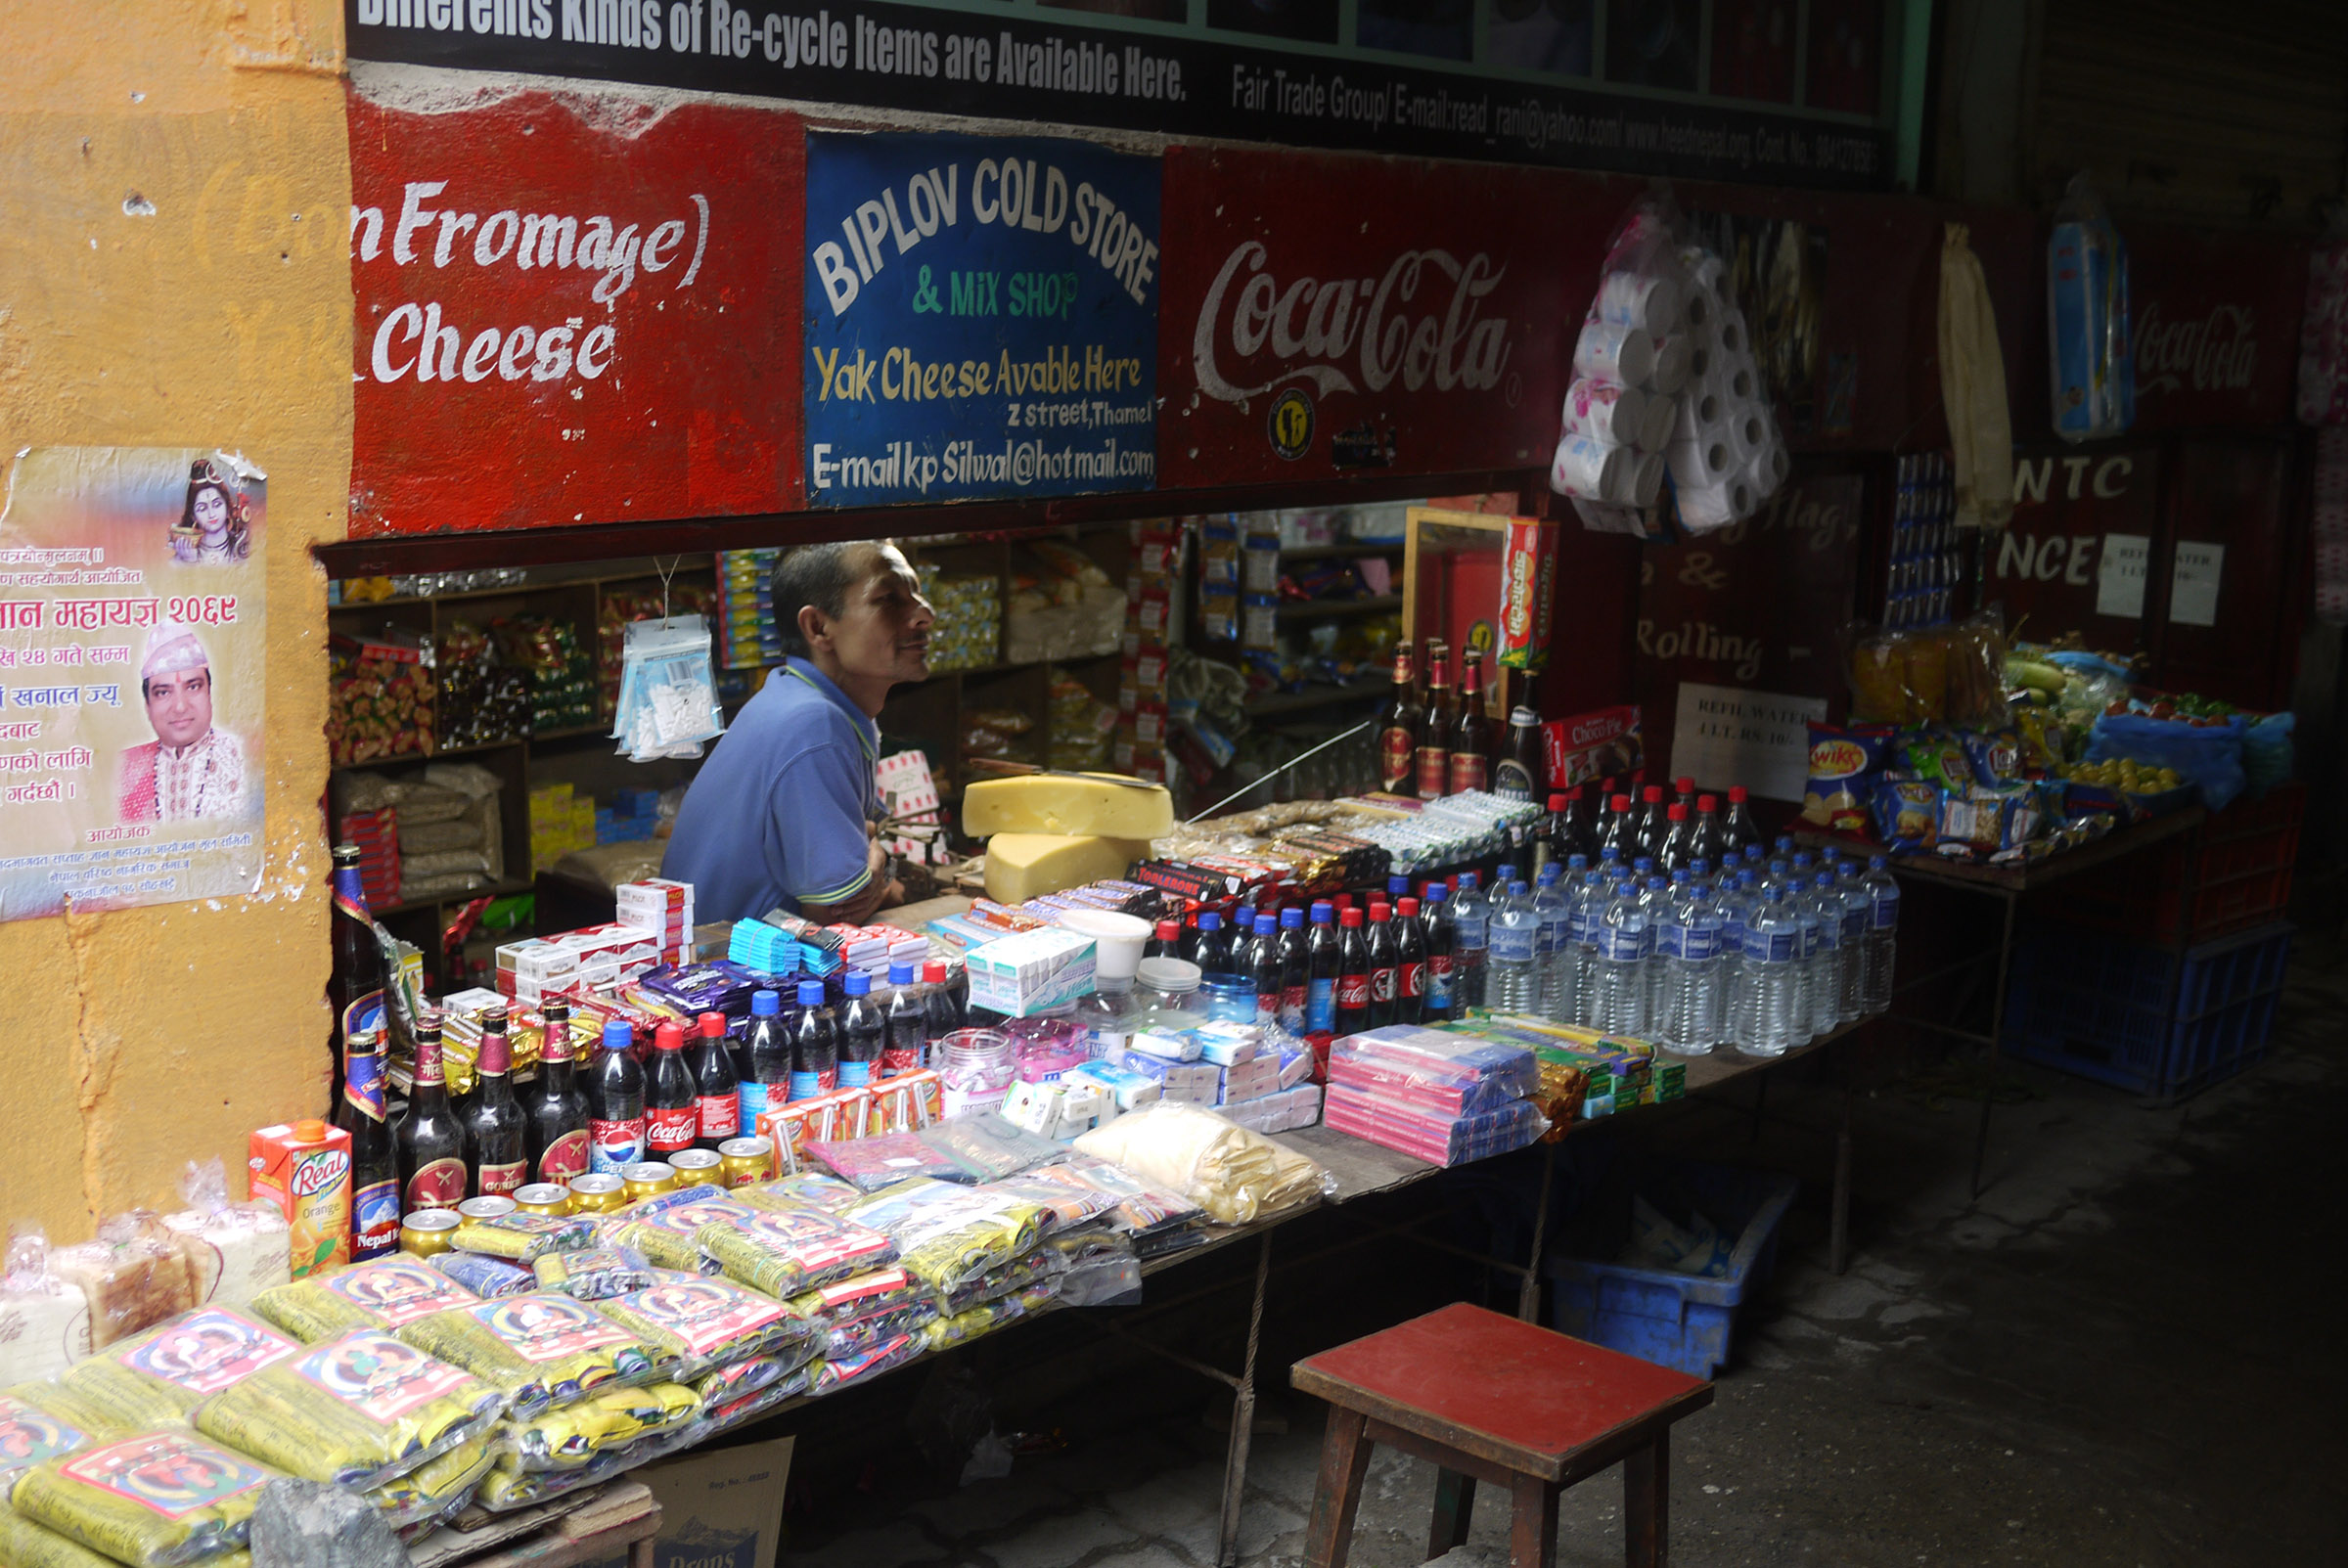 A shopkeeper looks over his counter, filled with Coca Cola products and other packaged items.